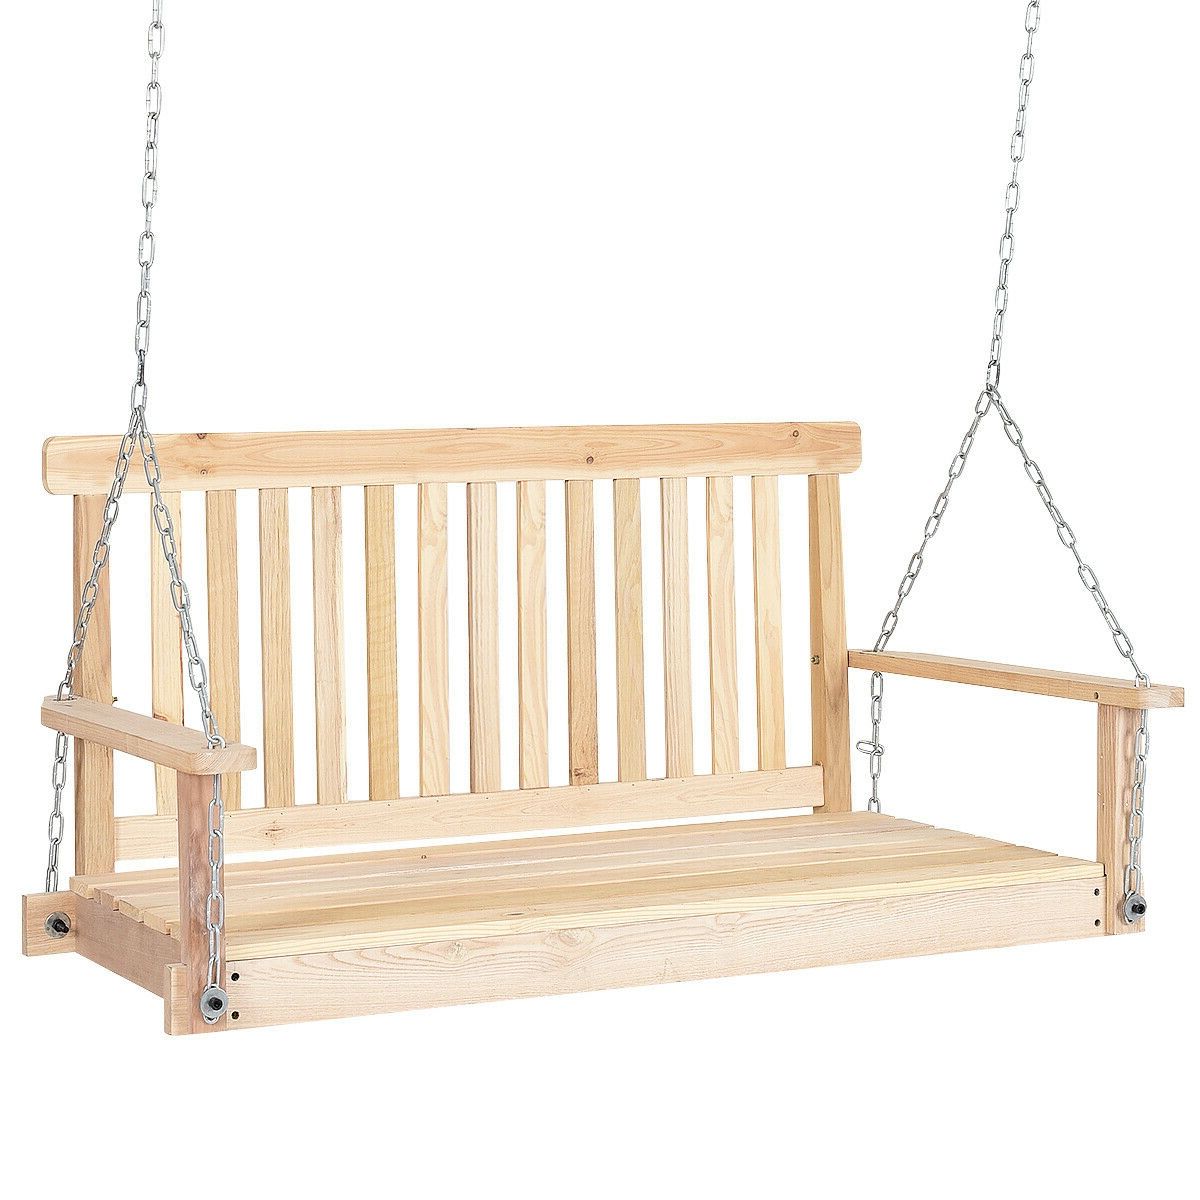 Most Recent 4' Wood Garden Hanging Seat Chains Porch Swing Intended For 3 Person Natural Cedar Wood Outdoor Swings (View 10 of 25)